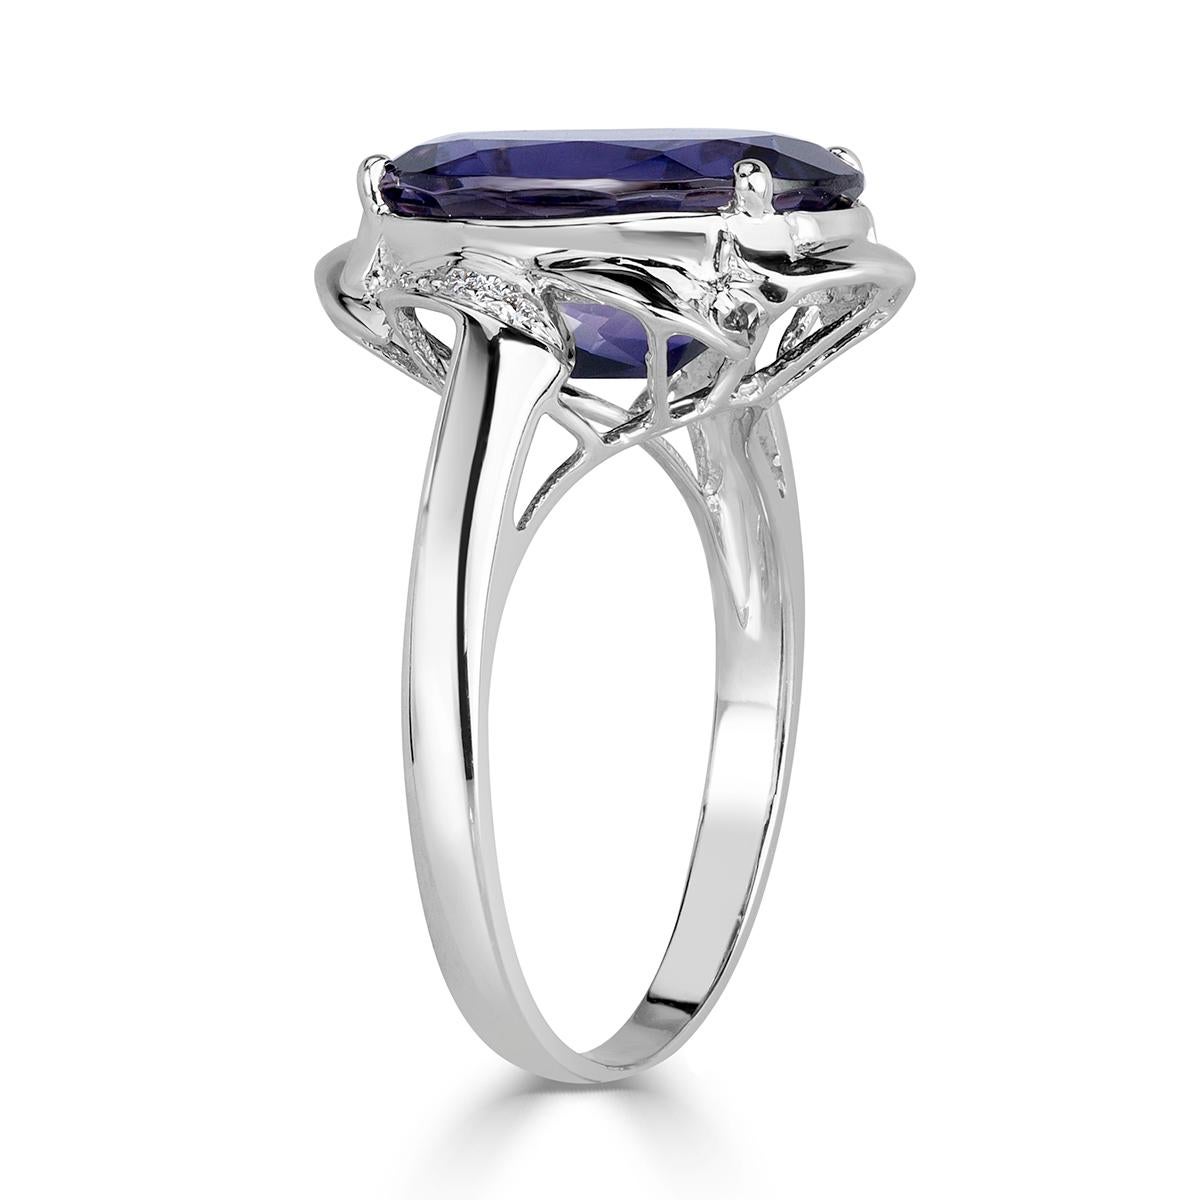 Women's or Men's Mark Broumand 4.87 Carat Oval Cut Violet Jolite and Diamond Ring For Sale